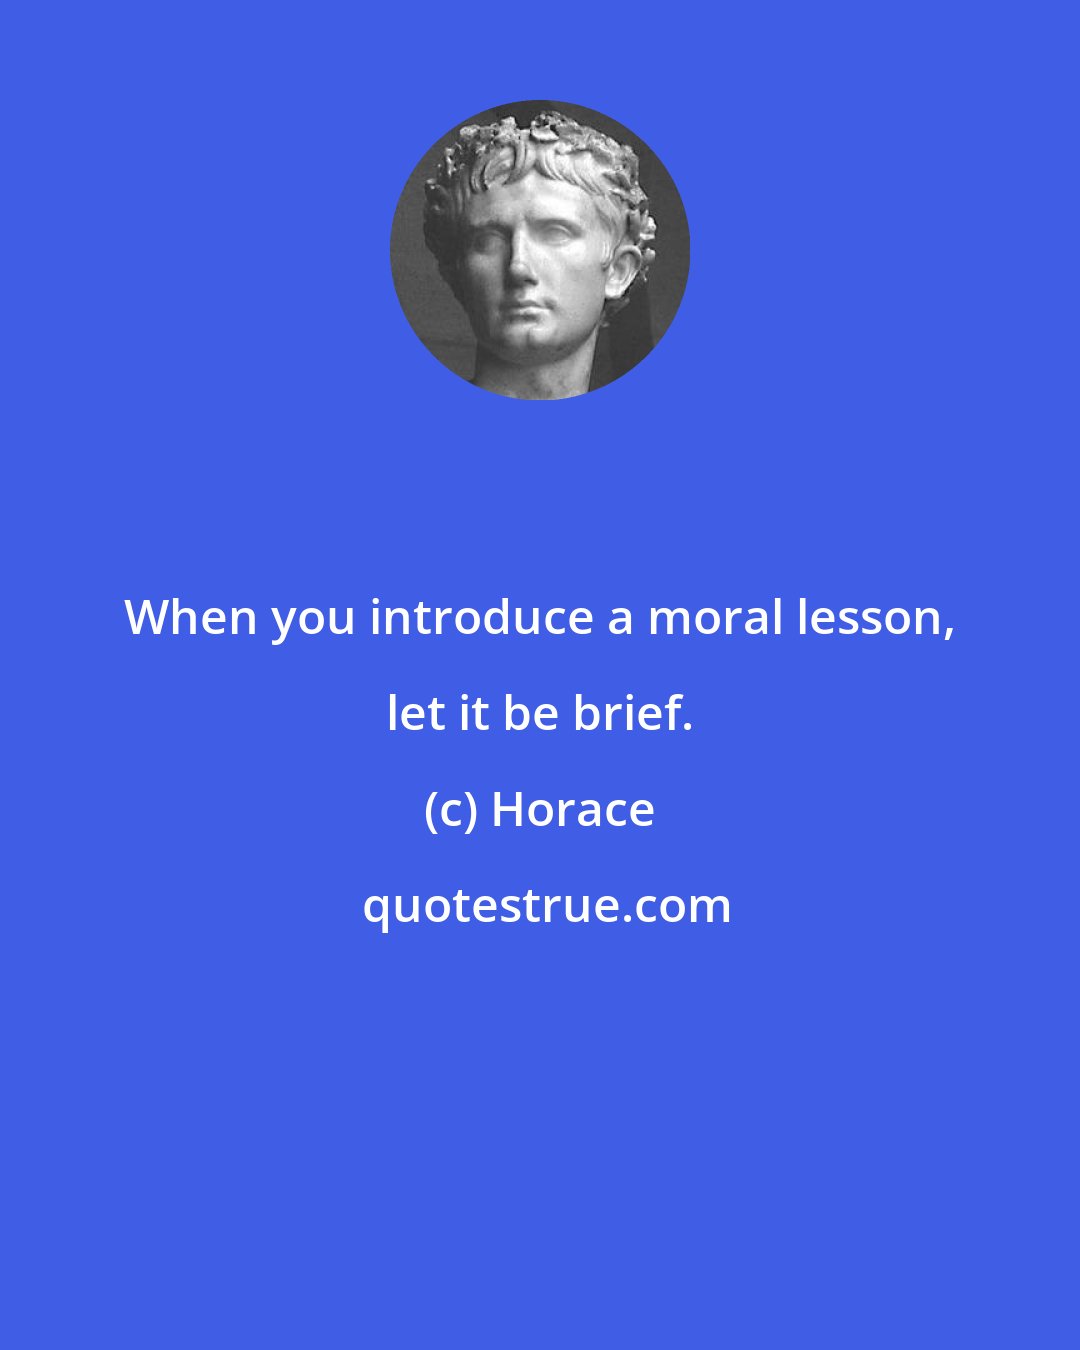 Horace: When you introduce a moral lesson, let it be brief.